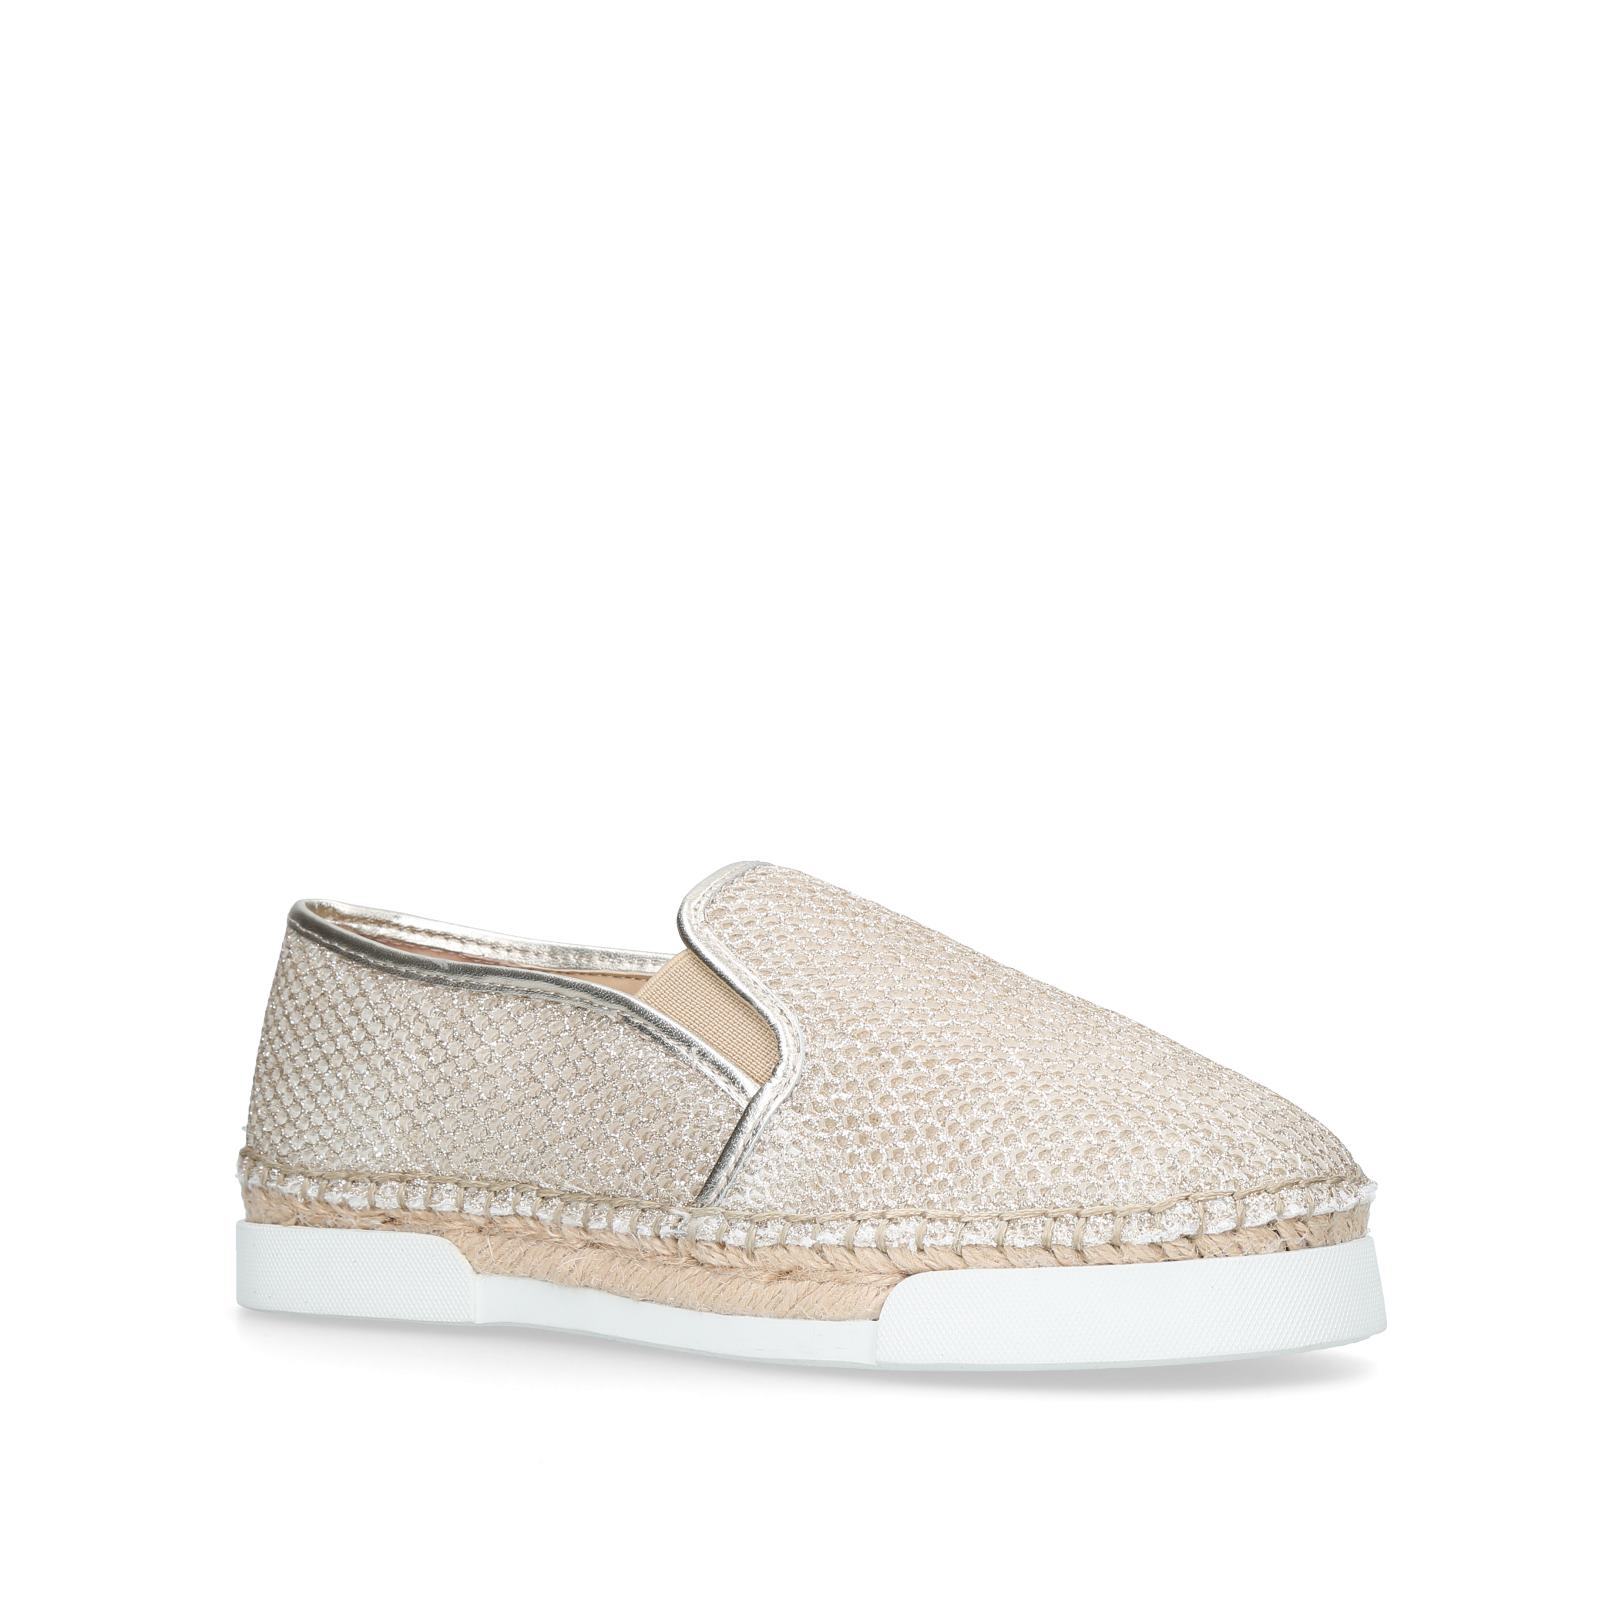 TAMBIE - VINCE CAMUTO Sneakers